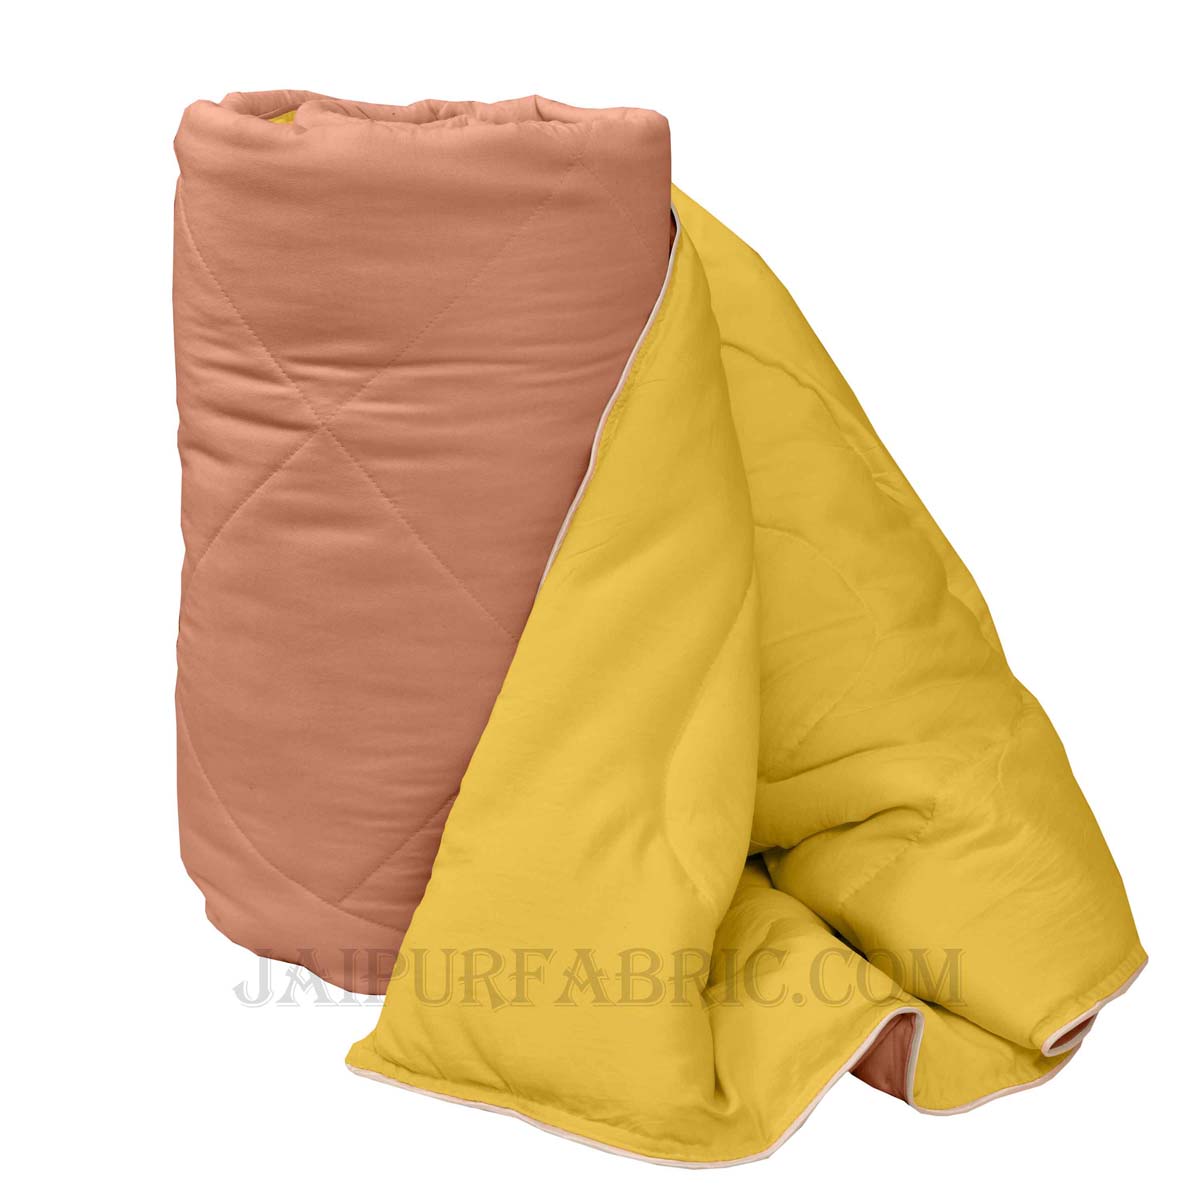 Ultra Soft Fluffy Reversible Brown Yellow Dual Tone Pure Cotton Cover Premium Micro Fibre Filling Double Bed Comforter